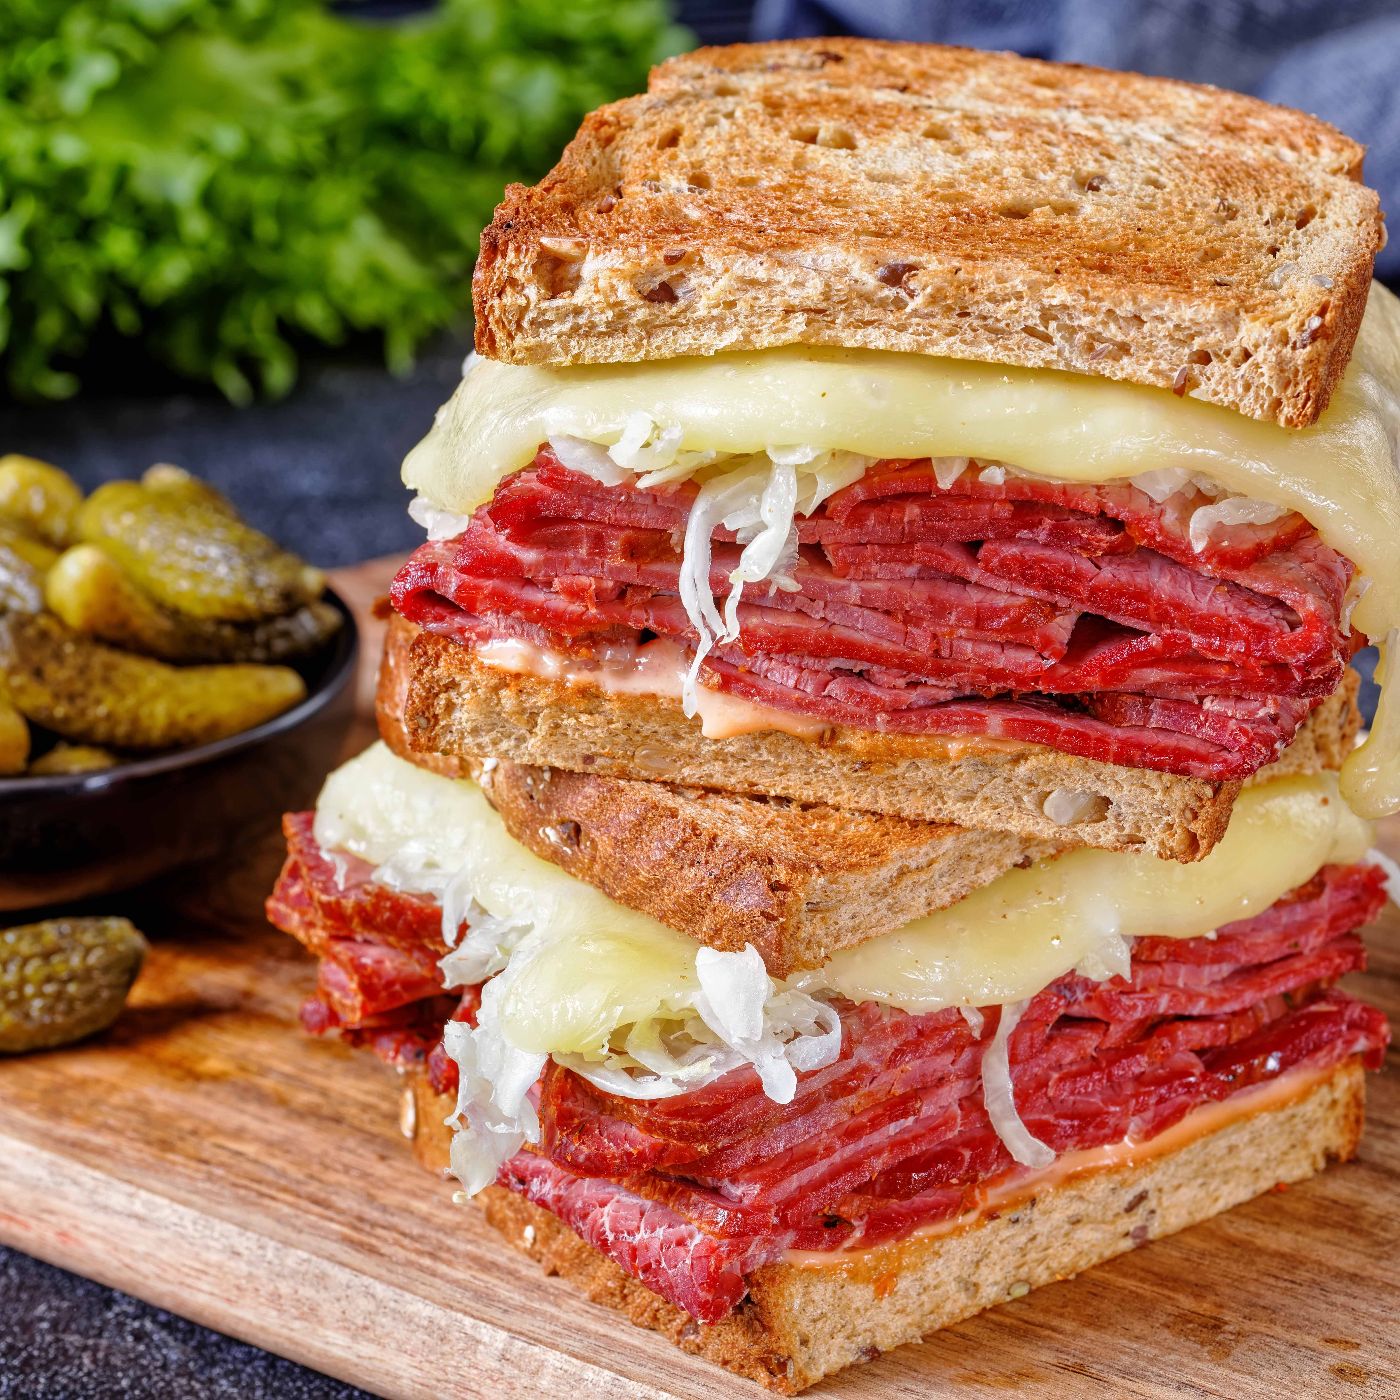 reuben-sandwich-with-corned-beef,-top-view-1393175182_8660x5773 square.jpg